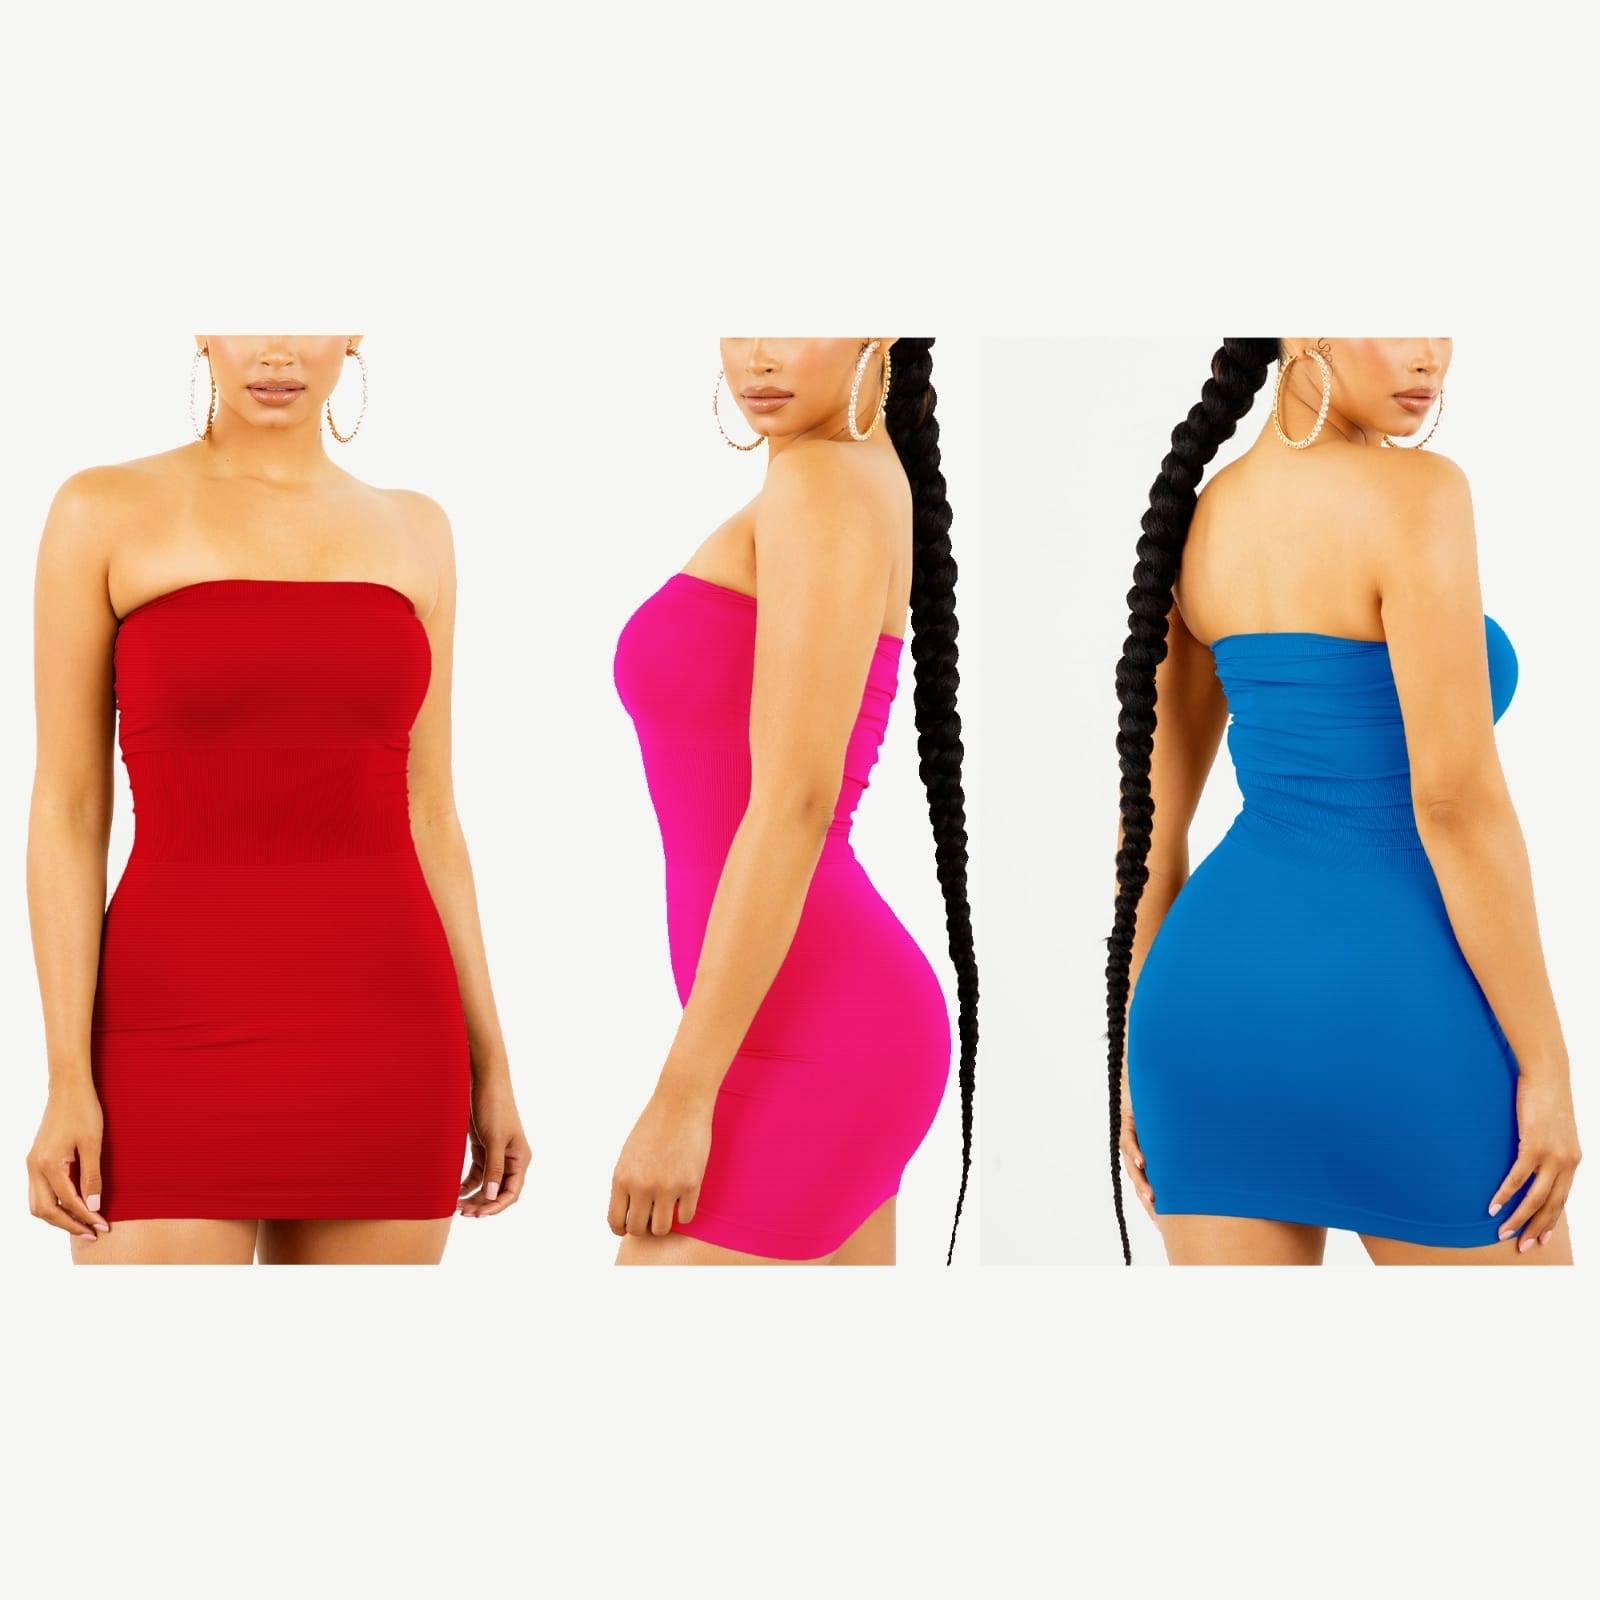 3-Pack Women's Strapless Stretchy Seamless Tight Fit Body Con Mini Tube Top Dress - PINK, 2XL